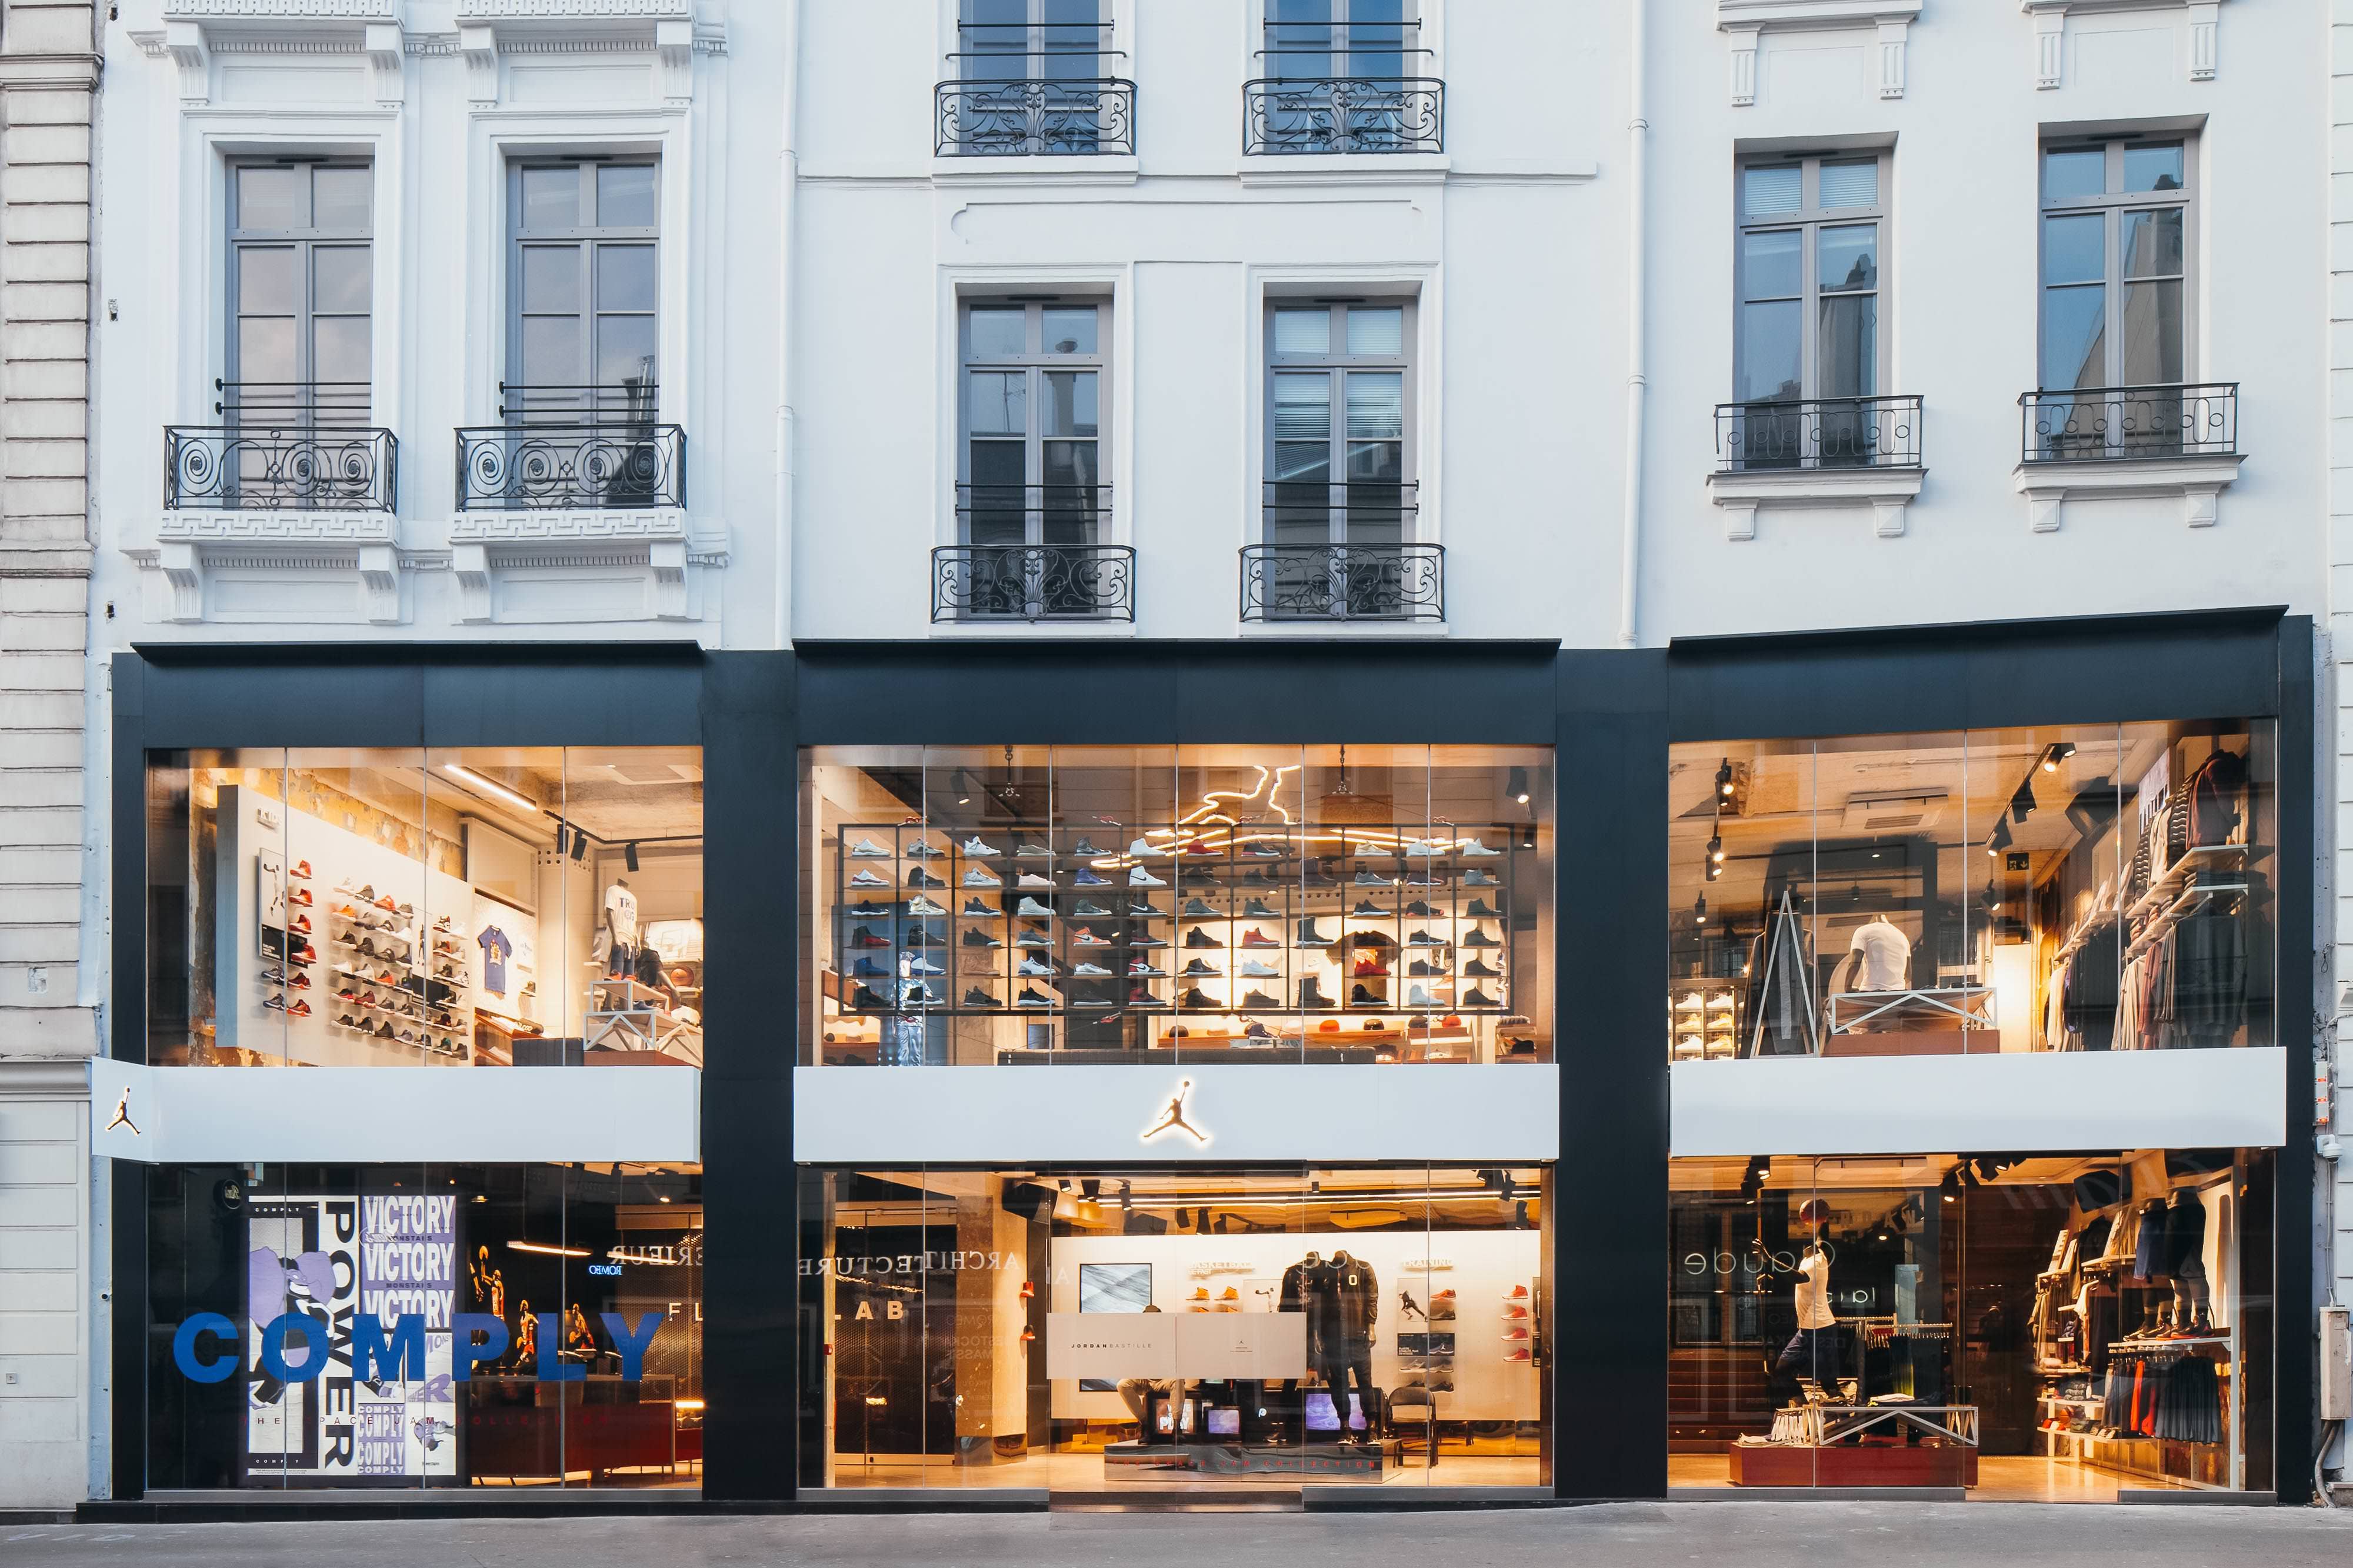 Go Inside the First-Ever Air Jordan Store in Europe